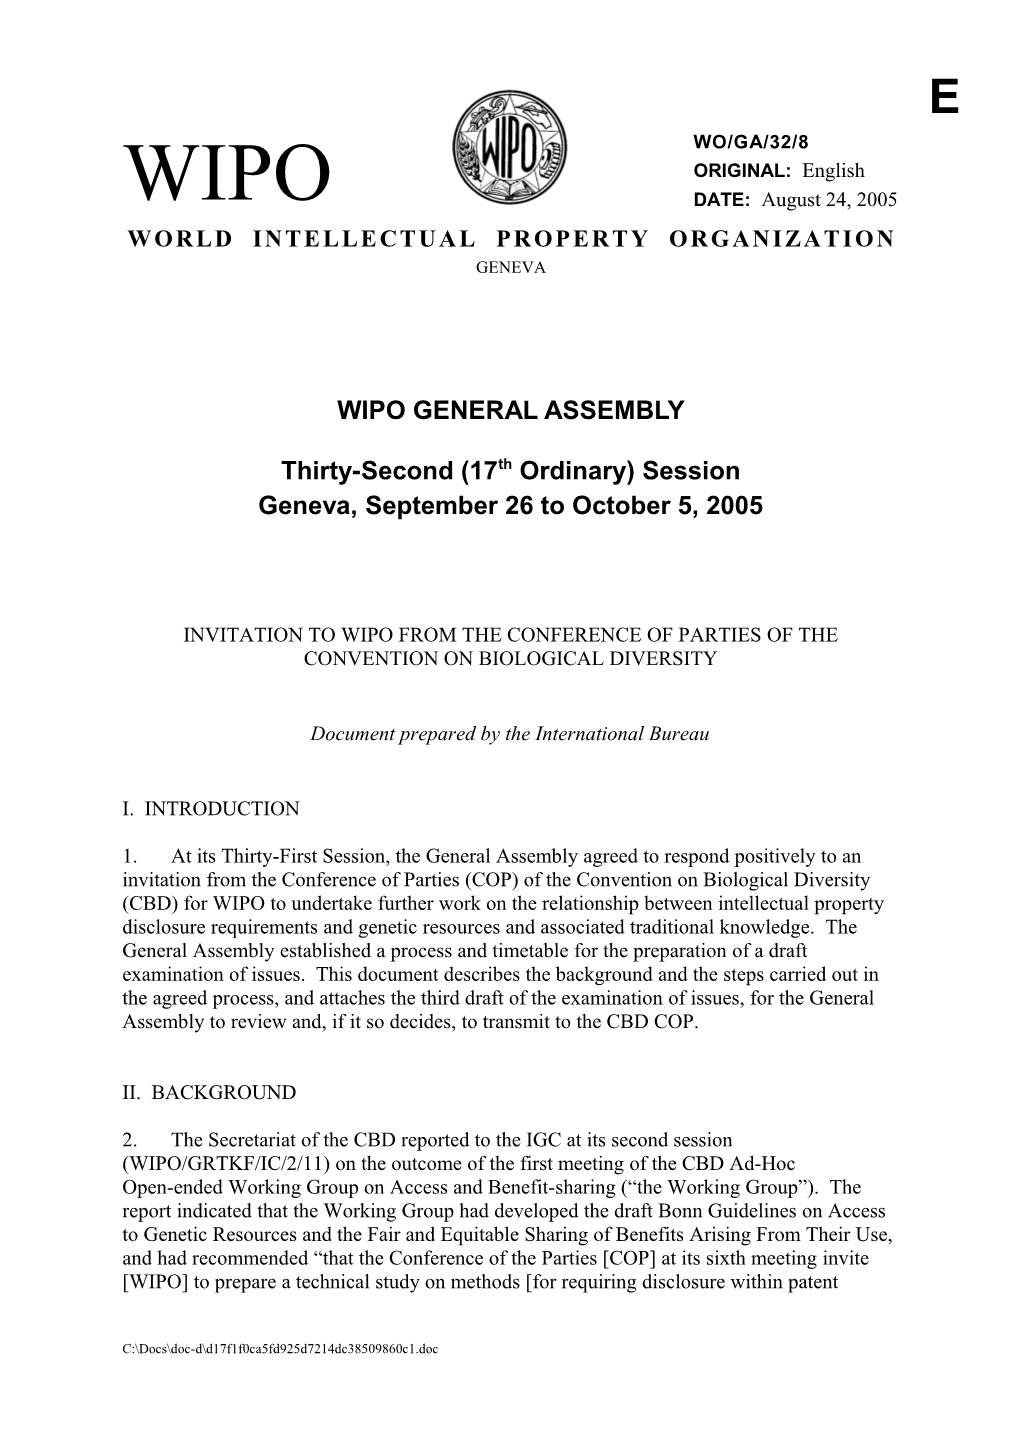 WO/GA/32/8: Invitation to WIPO from the Conference of Parties of the Convention on Biological